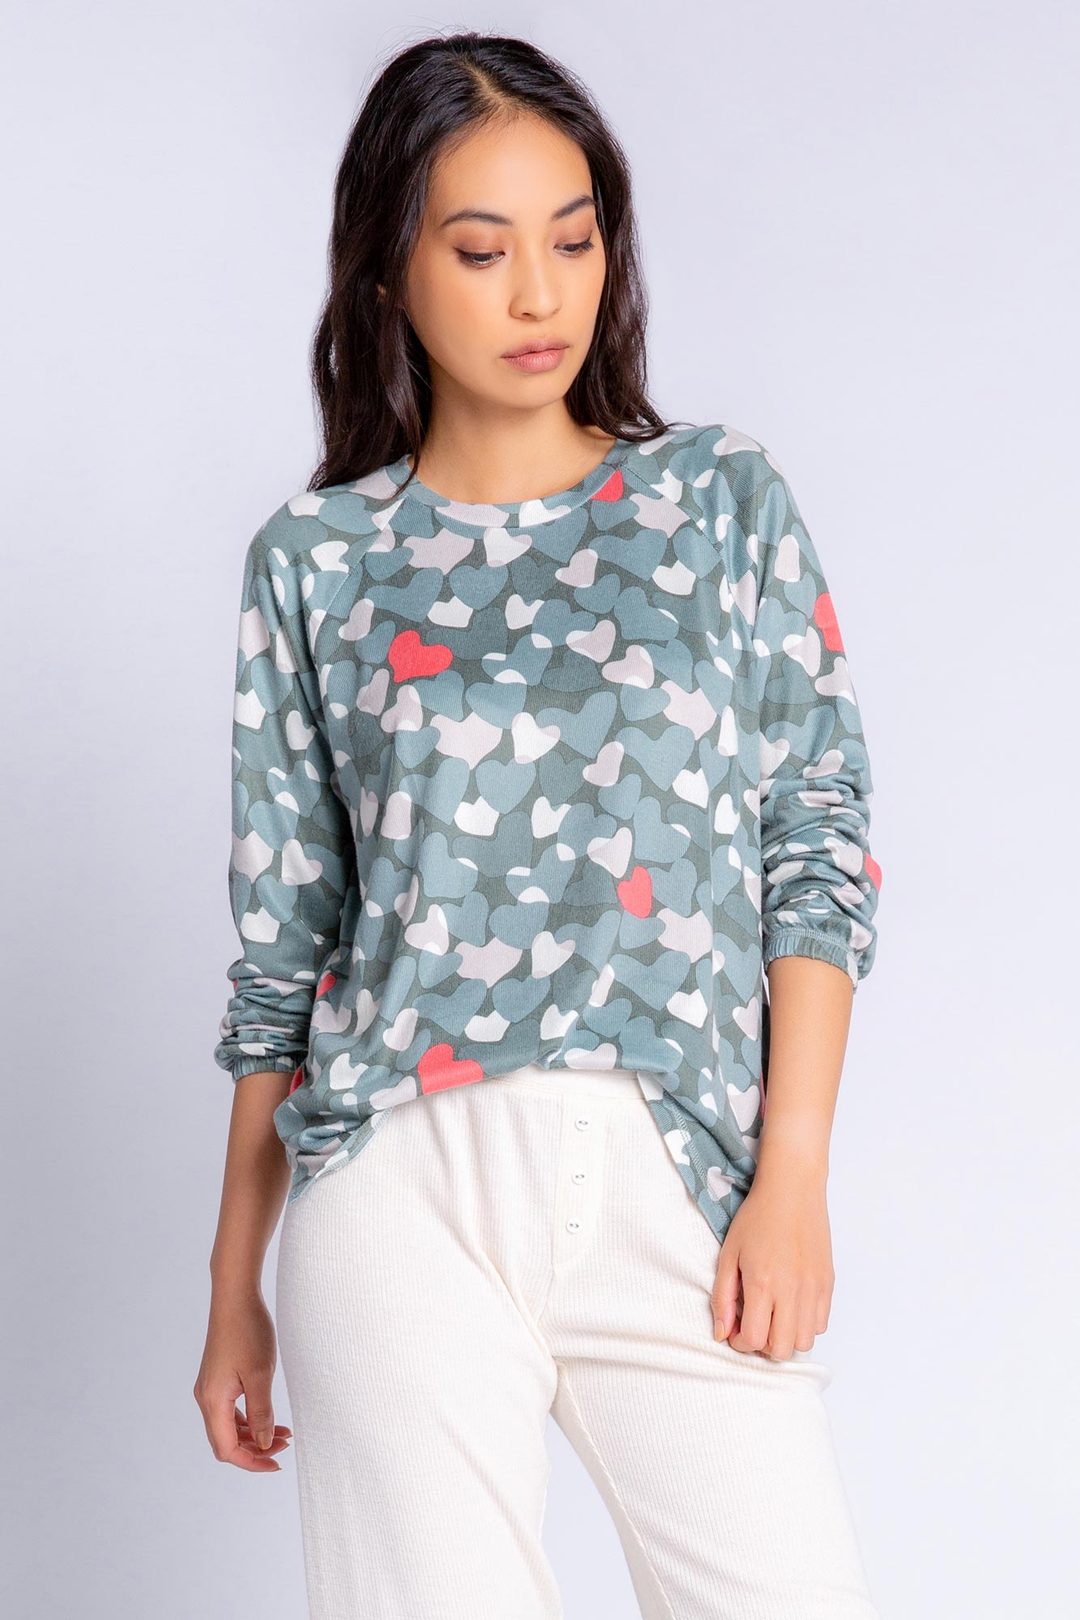 PJ Salvage Love In Camo Long Sleeve Top Color: Sage Size: XS, S, M, L at Petticoat Lane  Greenwich, CT